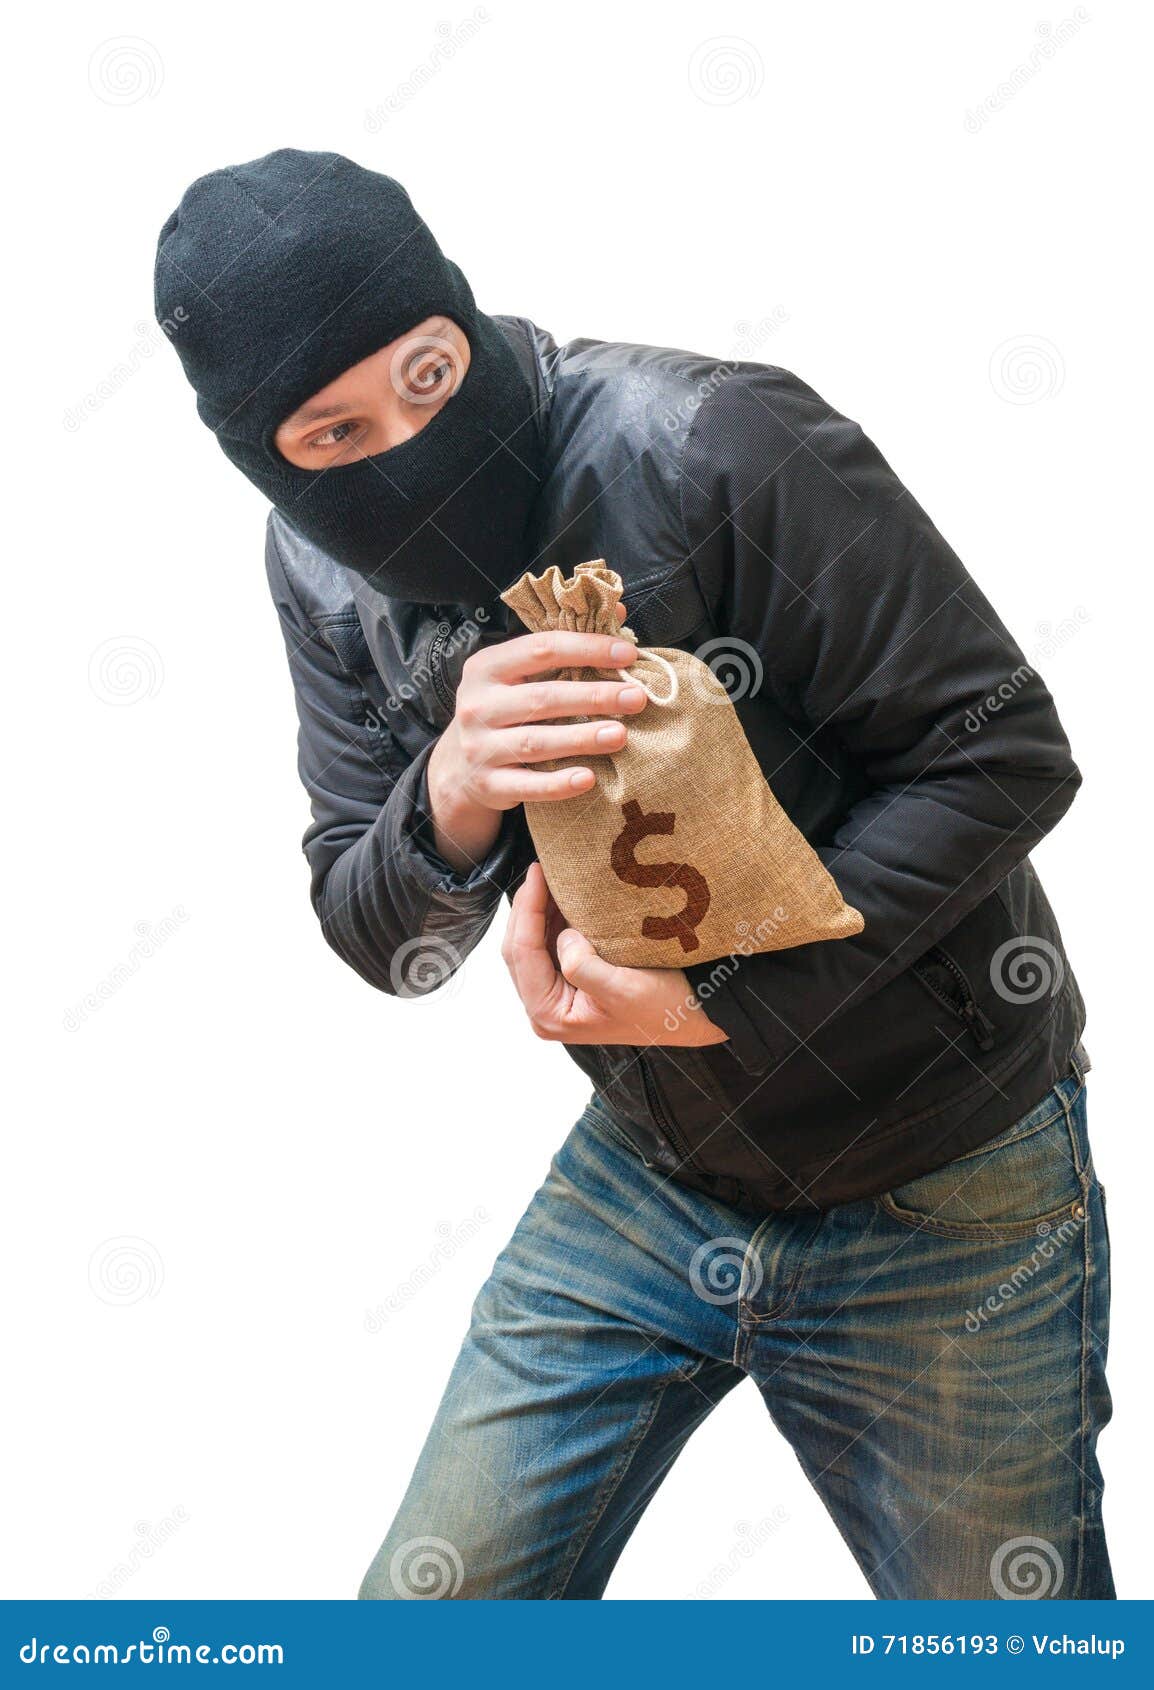 thief or robber is stealing bag full of money with dollar sign